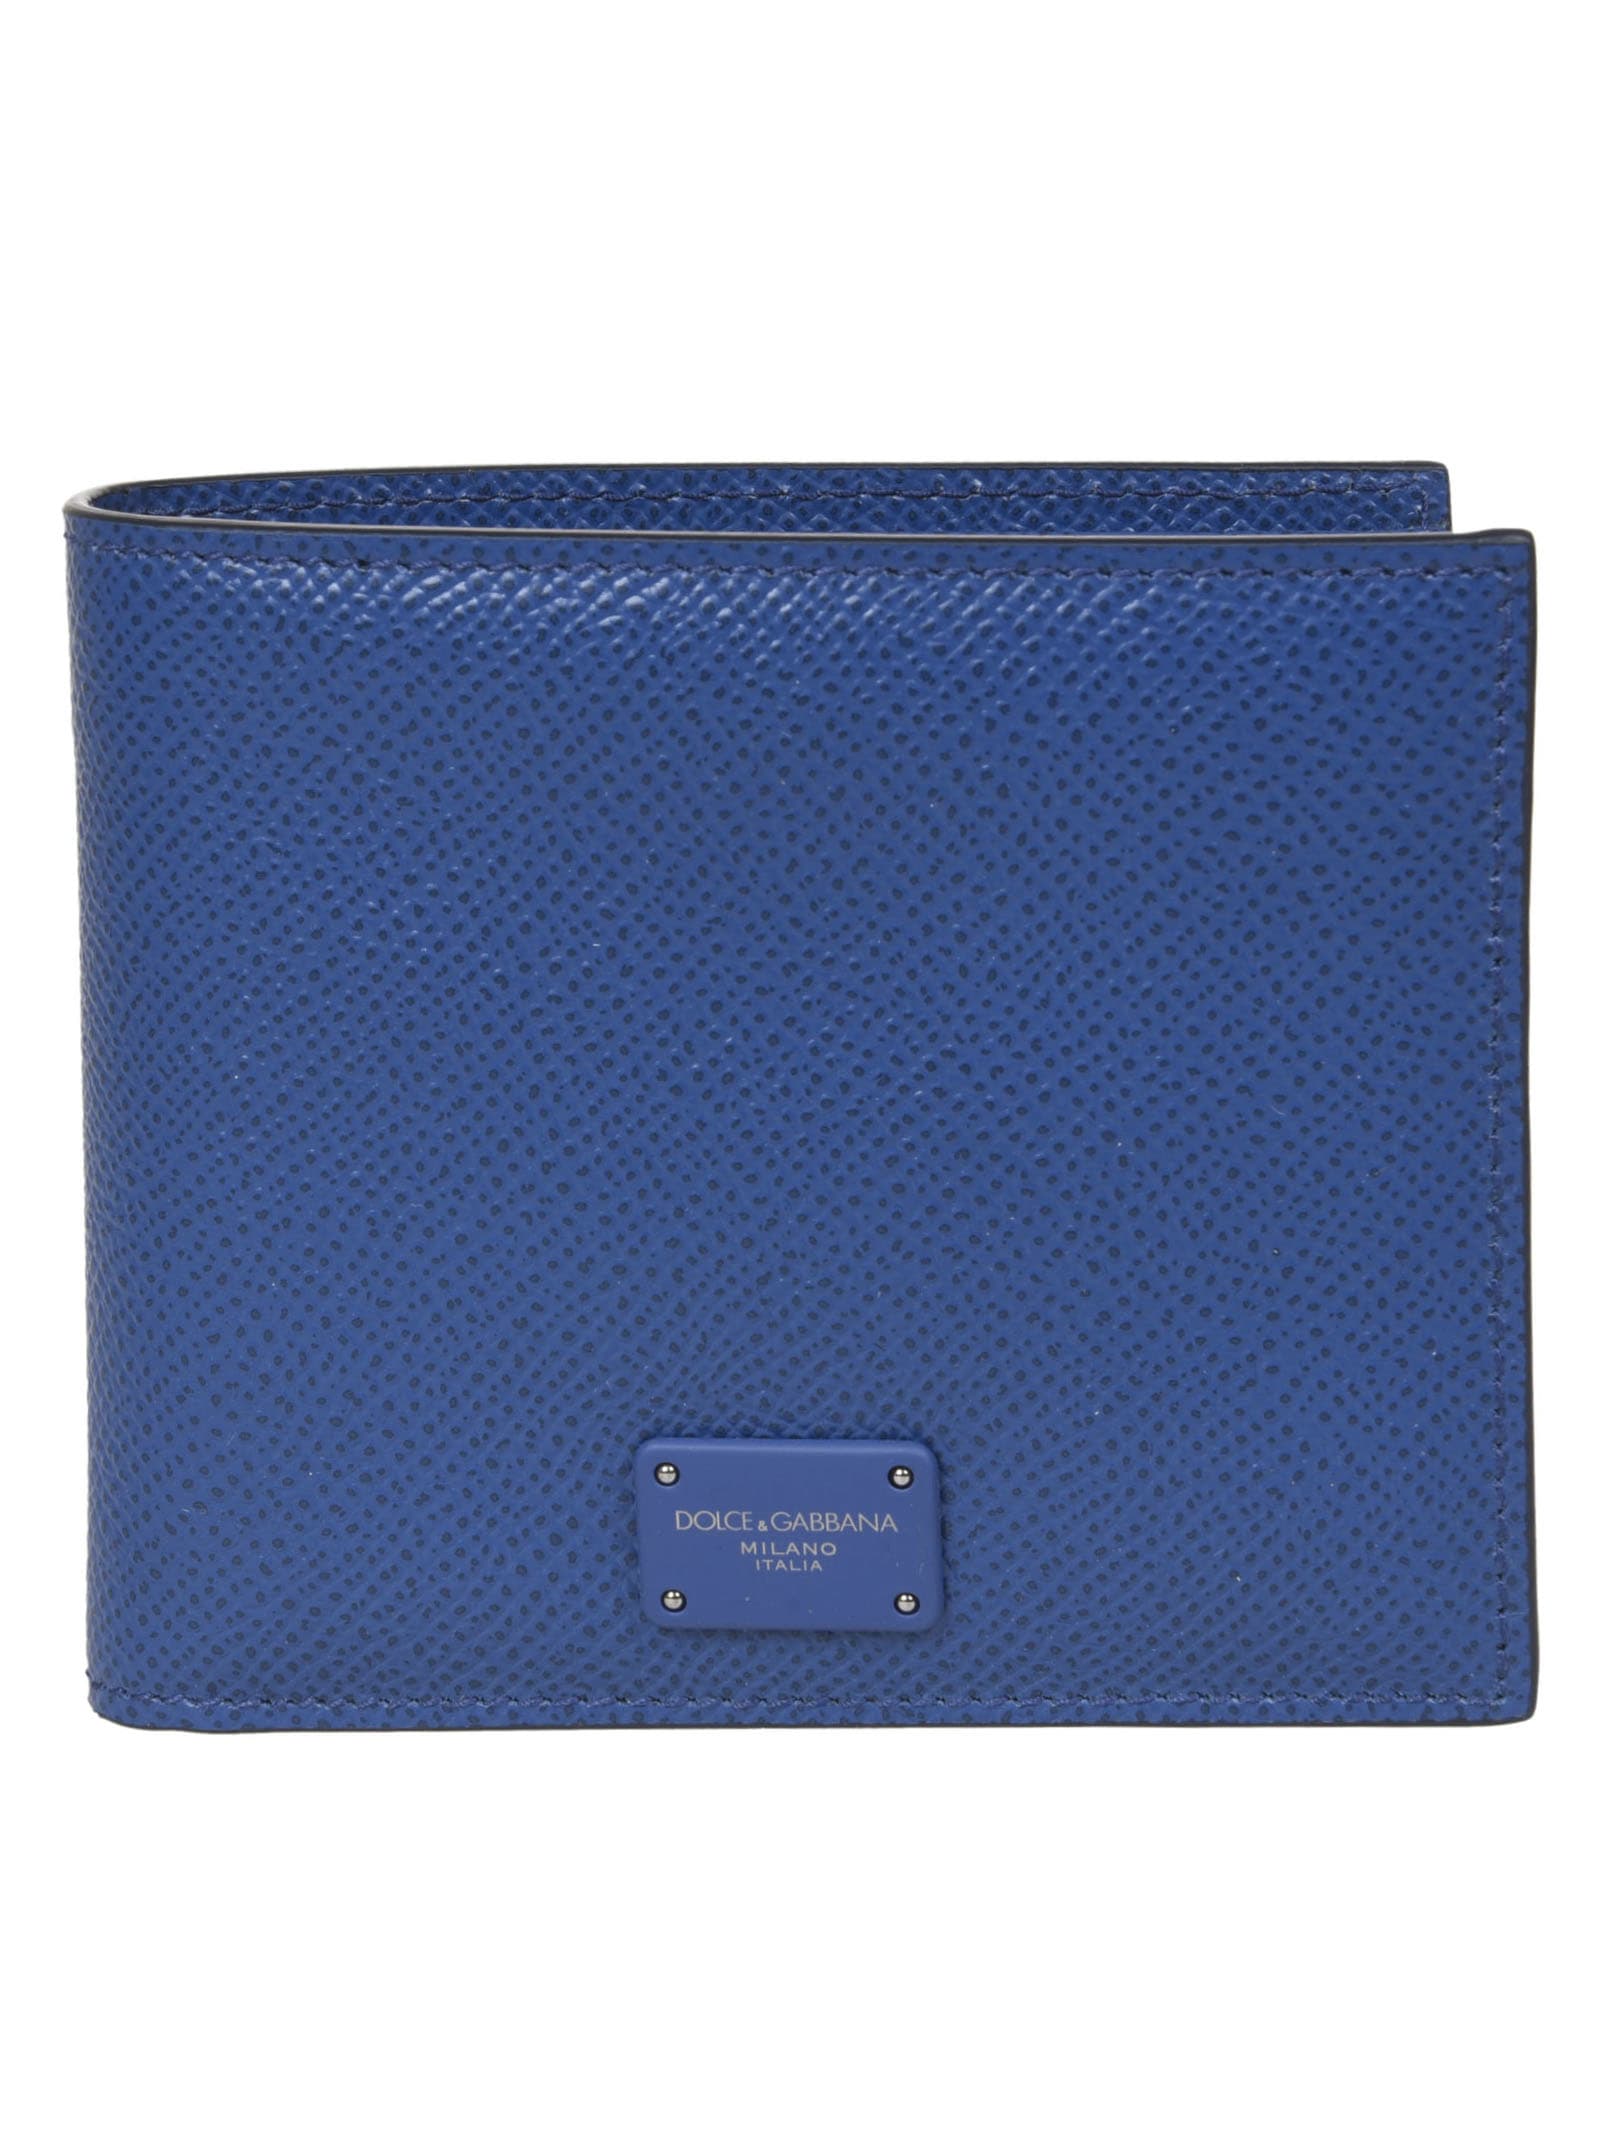 Dolce & Gabbana Leather Logo Patch Cardholder in Blue for Men Mens Accessories Wallets and cardholders 